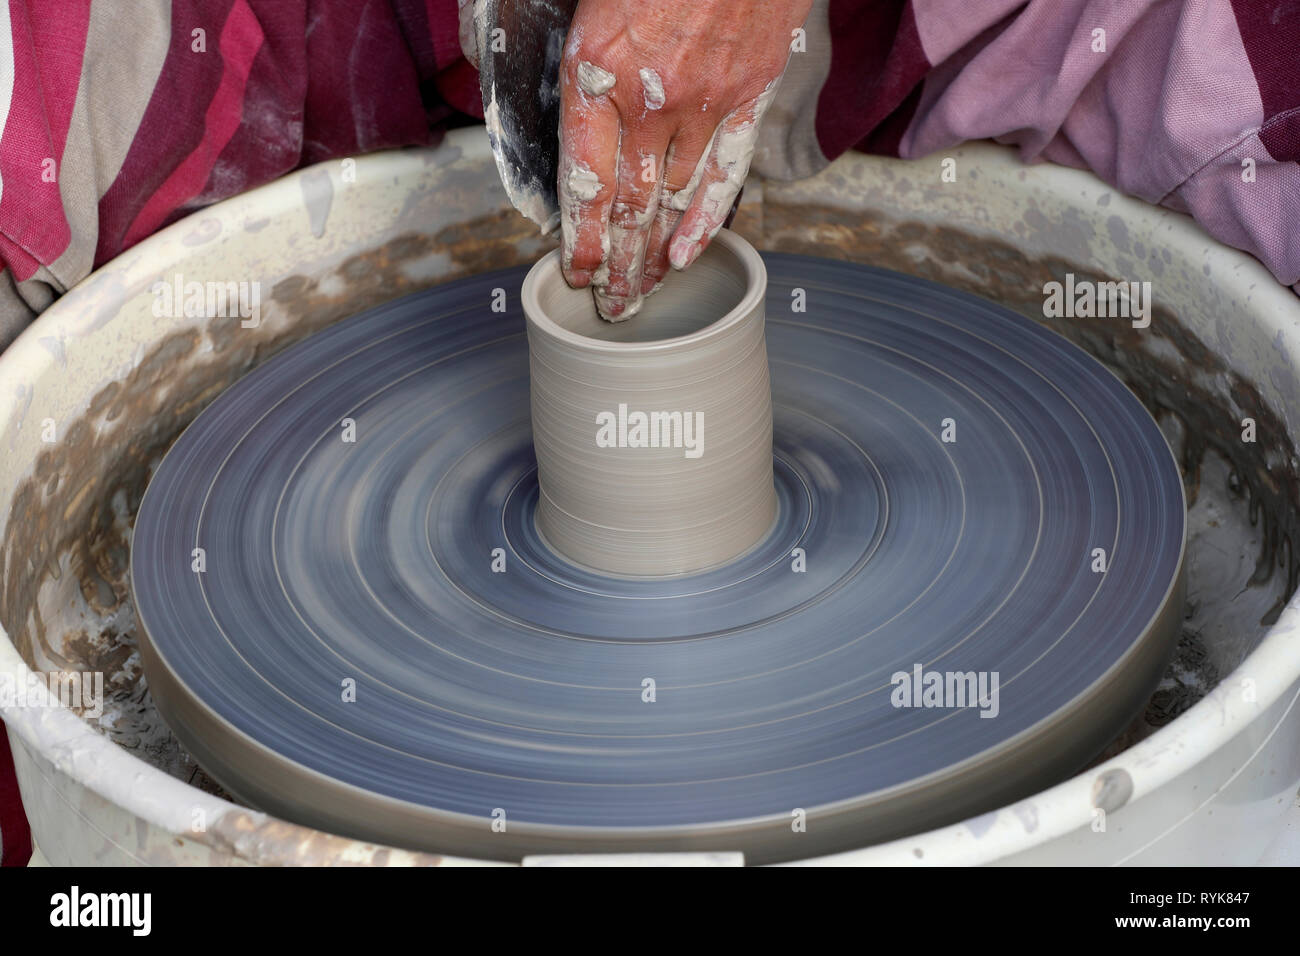 Old Domancy craft festival. The hands of a potter shaping clay at a potters wheel.  France. Stock Photo